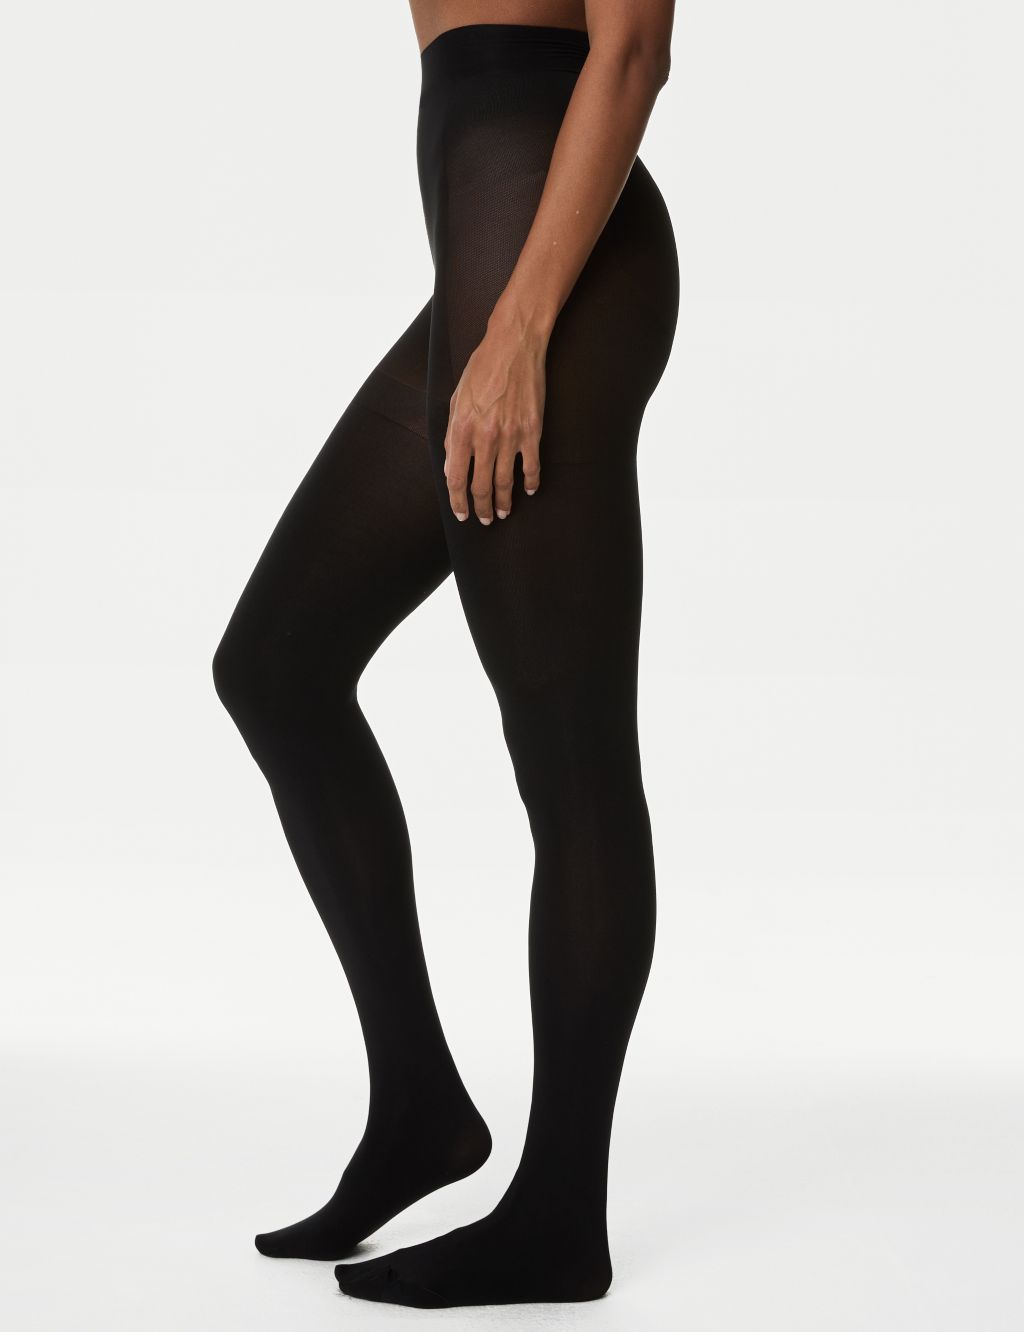 19.11% OFF on Marks & Spencer Women Firm Support Tights 20 Denier